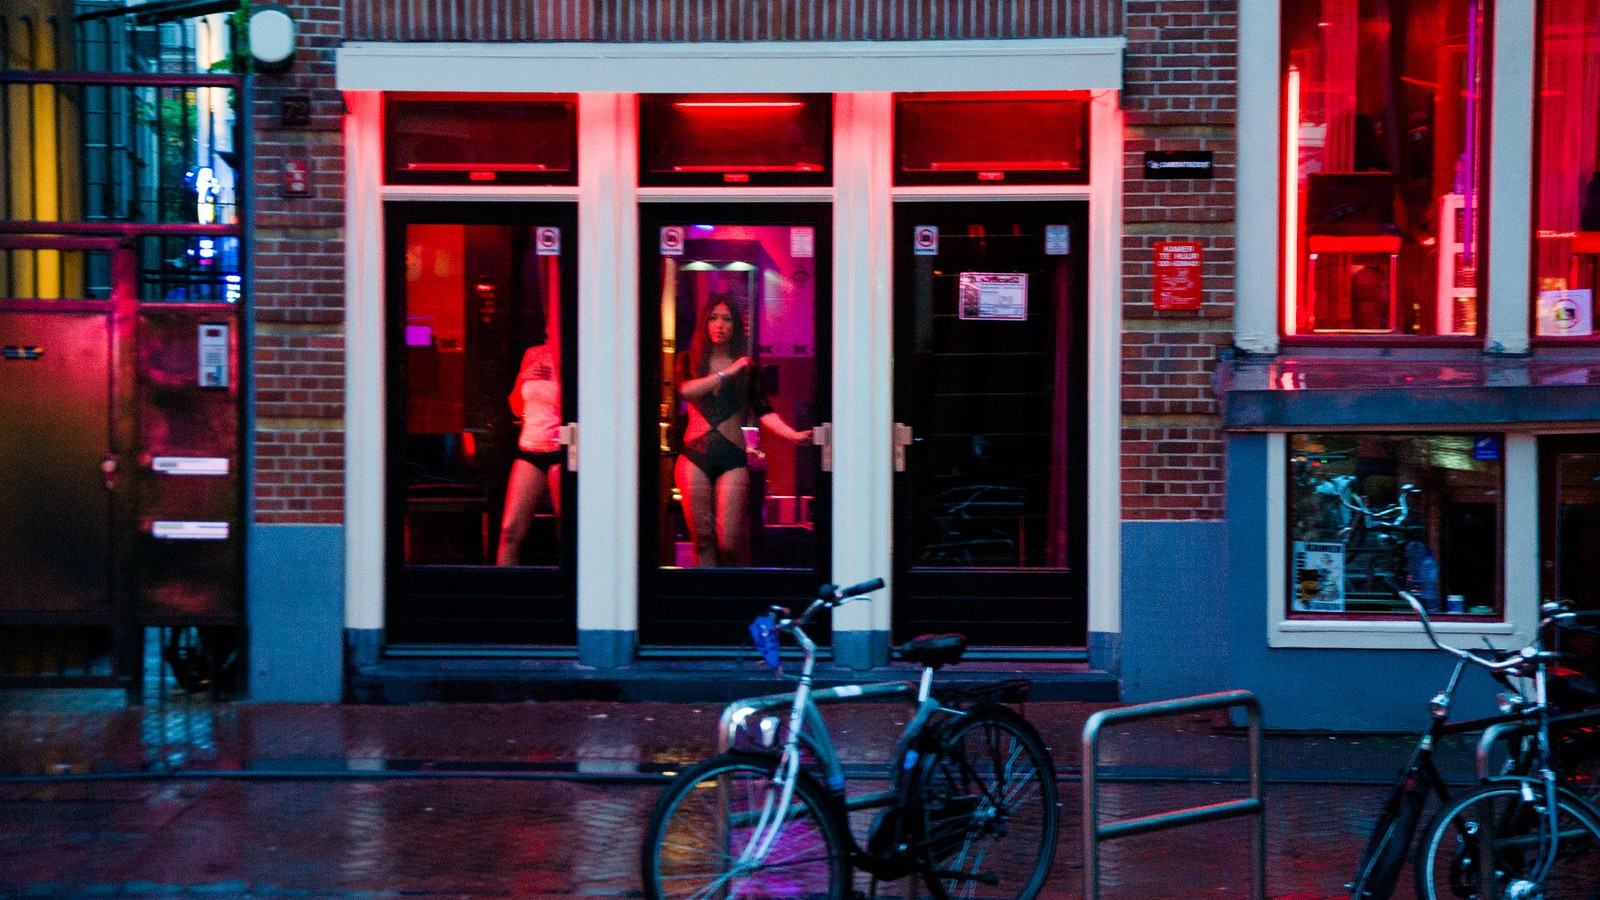 Save Our Windows Amsterdam S Plan For The Red Light District